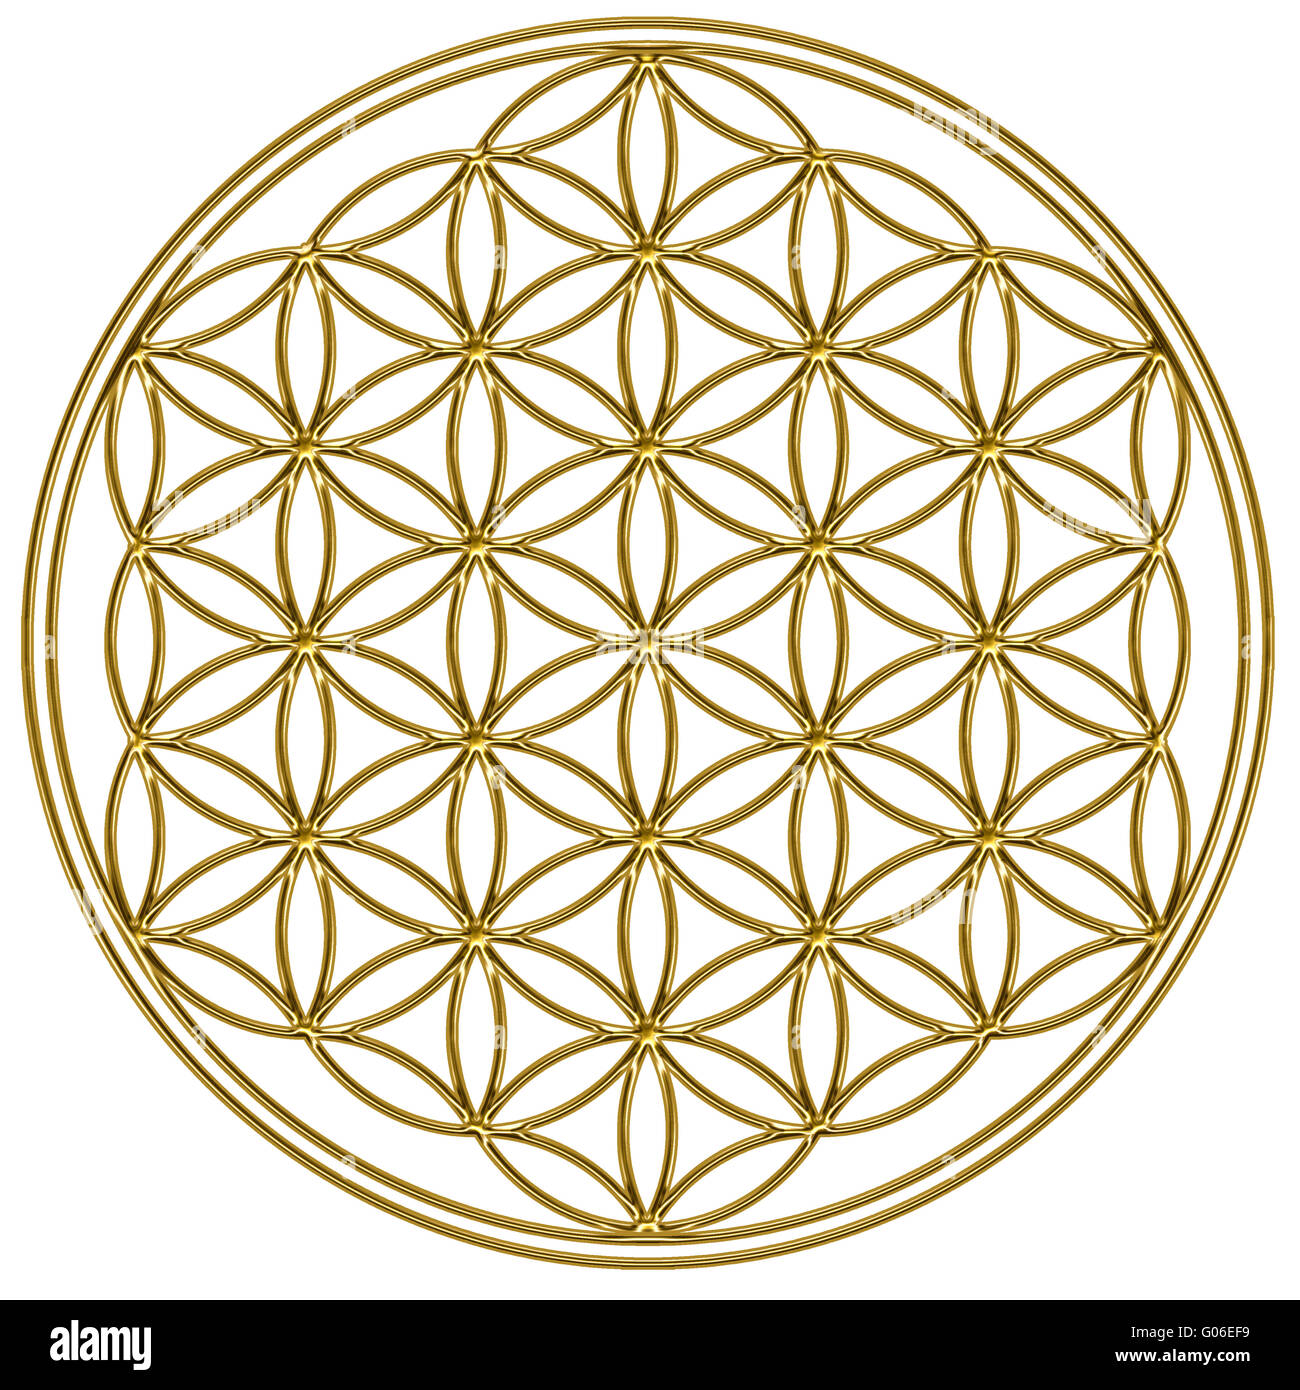 The Flower of Life no 16-Flower of Life Living Flower Chakra picture energy picture 